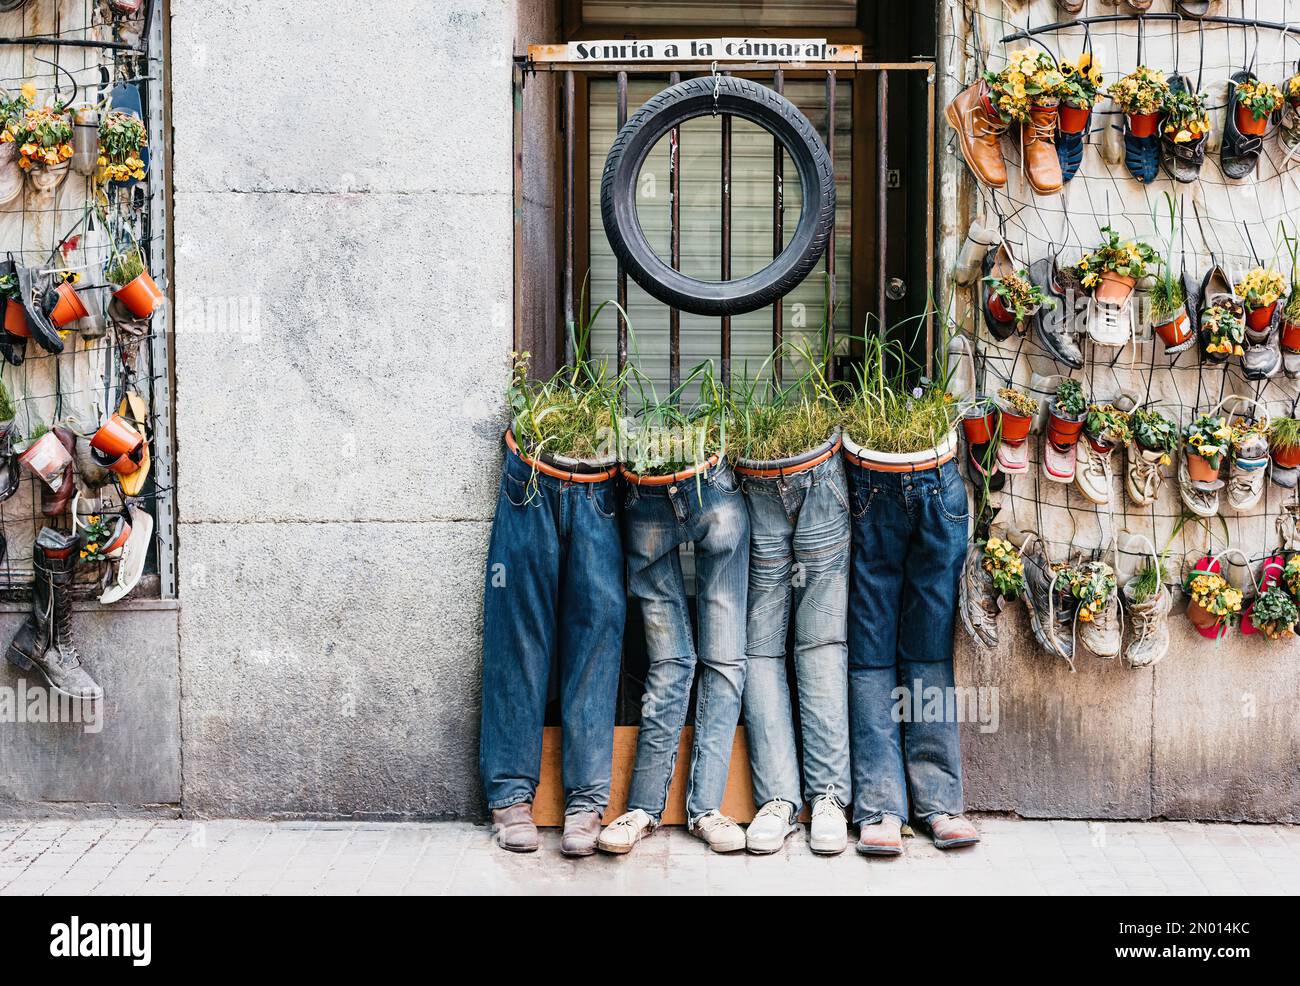 general view of original planters made of jeans. In the photo there is a  sign that says "Smile for the camera Stock Photo - Alamy